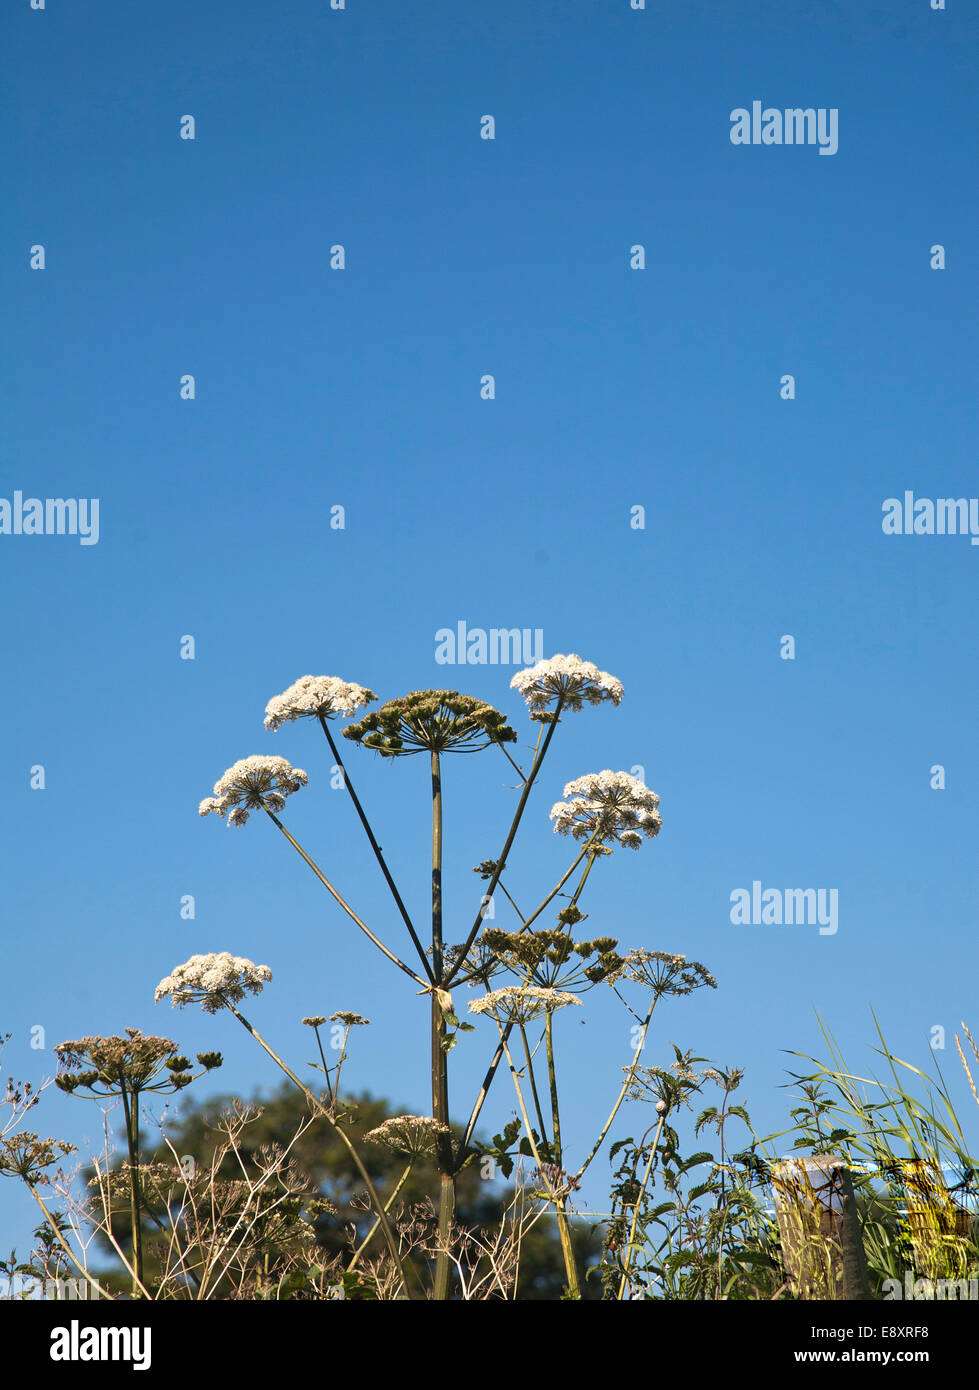 Cow Parsley- anthriscus sylvestris also known as Queen Anne's Lace or Wild Chervil against a clear blue summer sky Stock Photo